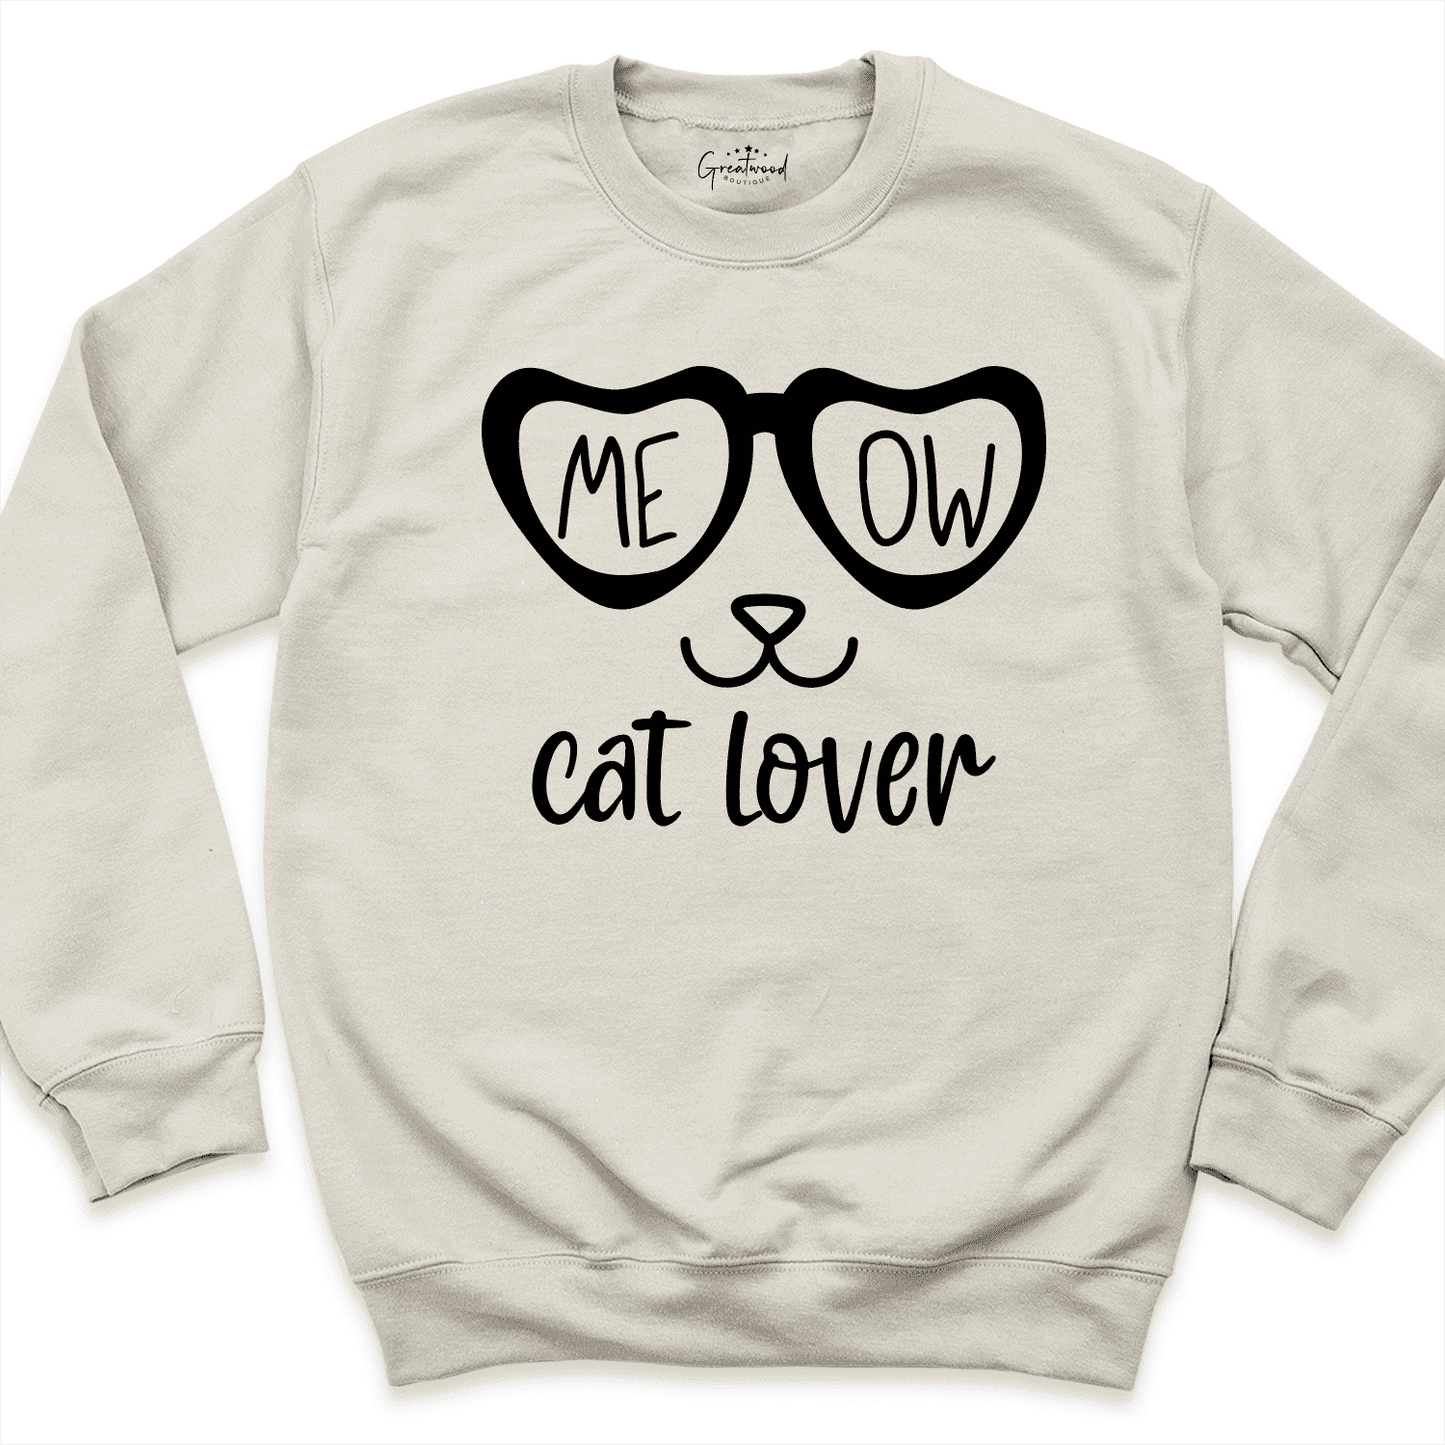 Meow Cat Lover Shirt Sand - Greatwood Boutique